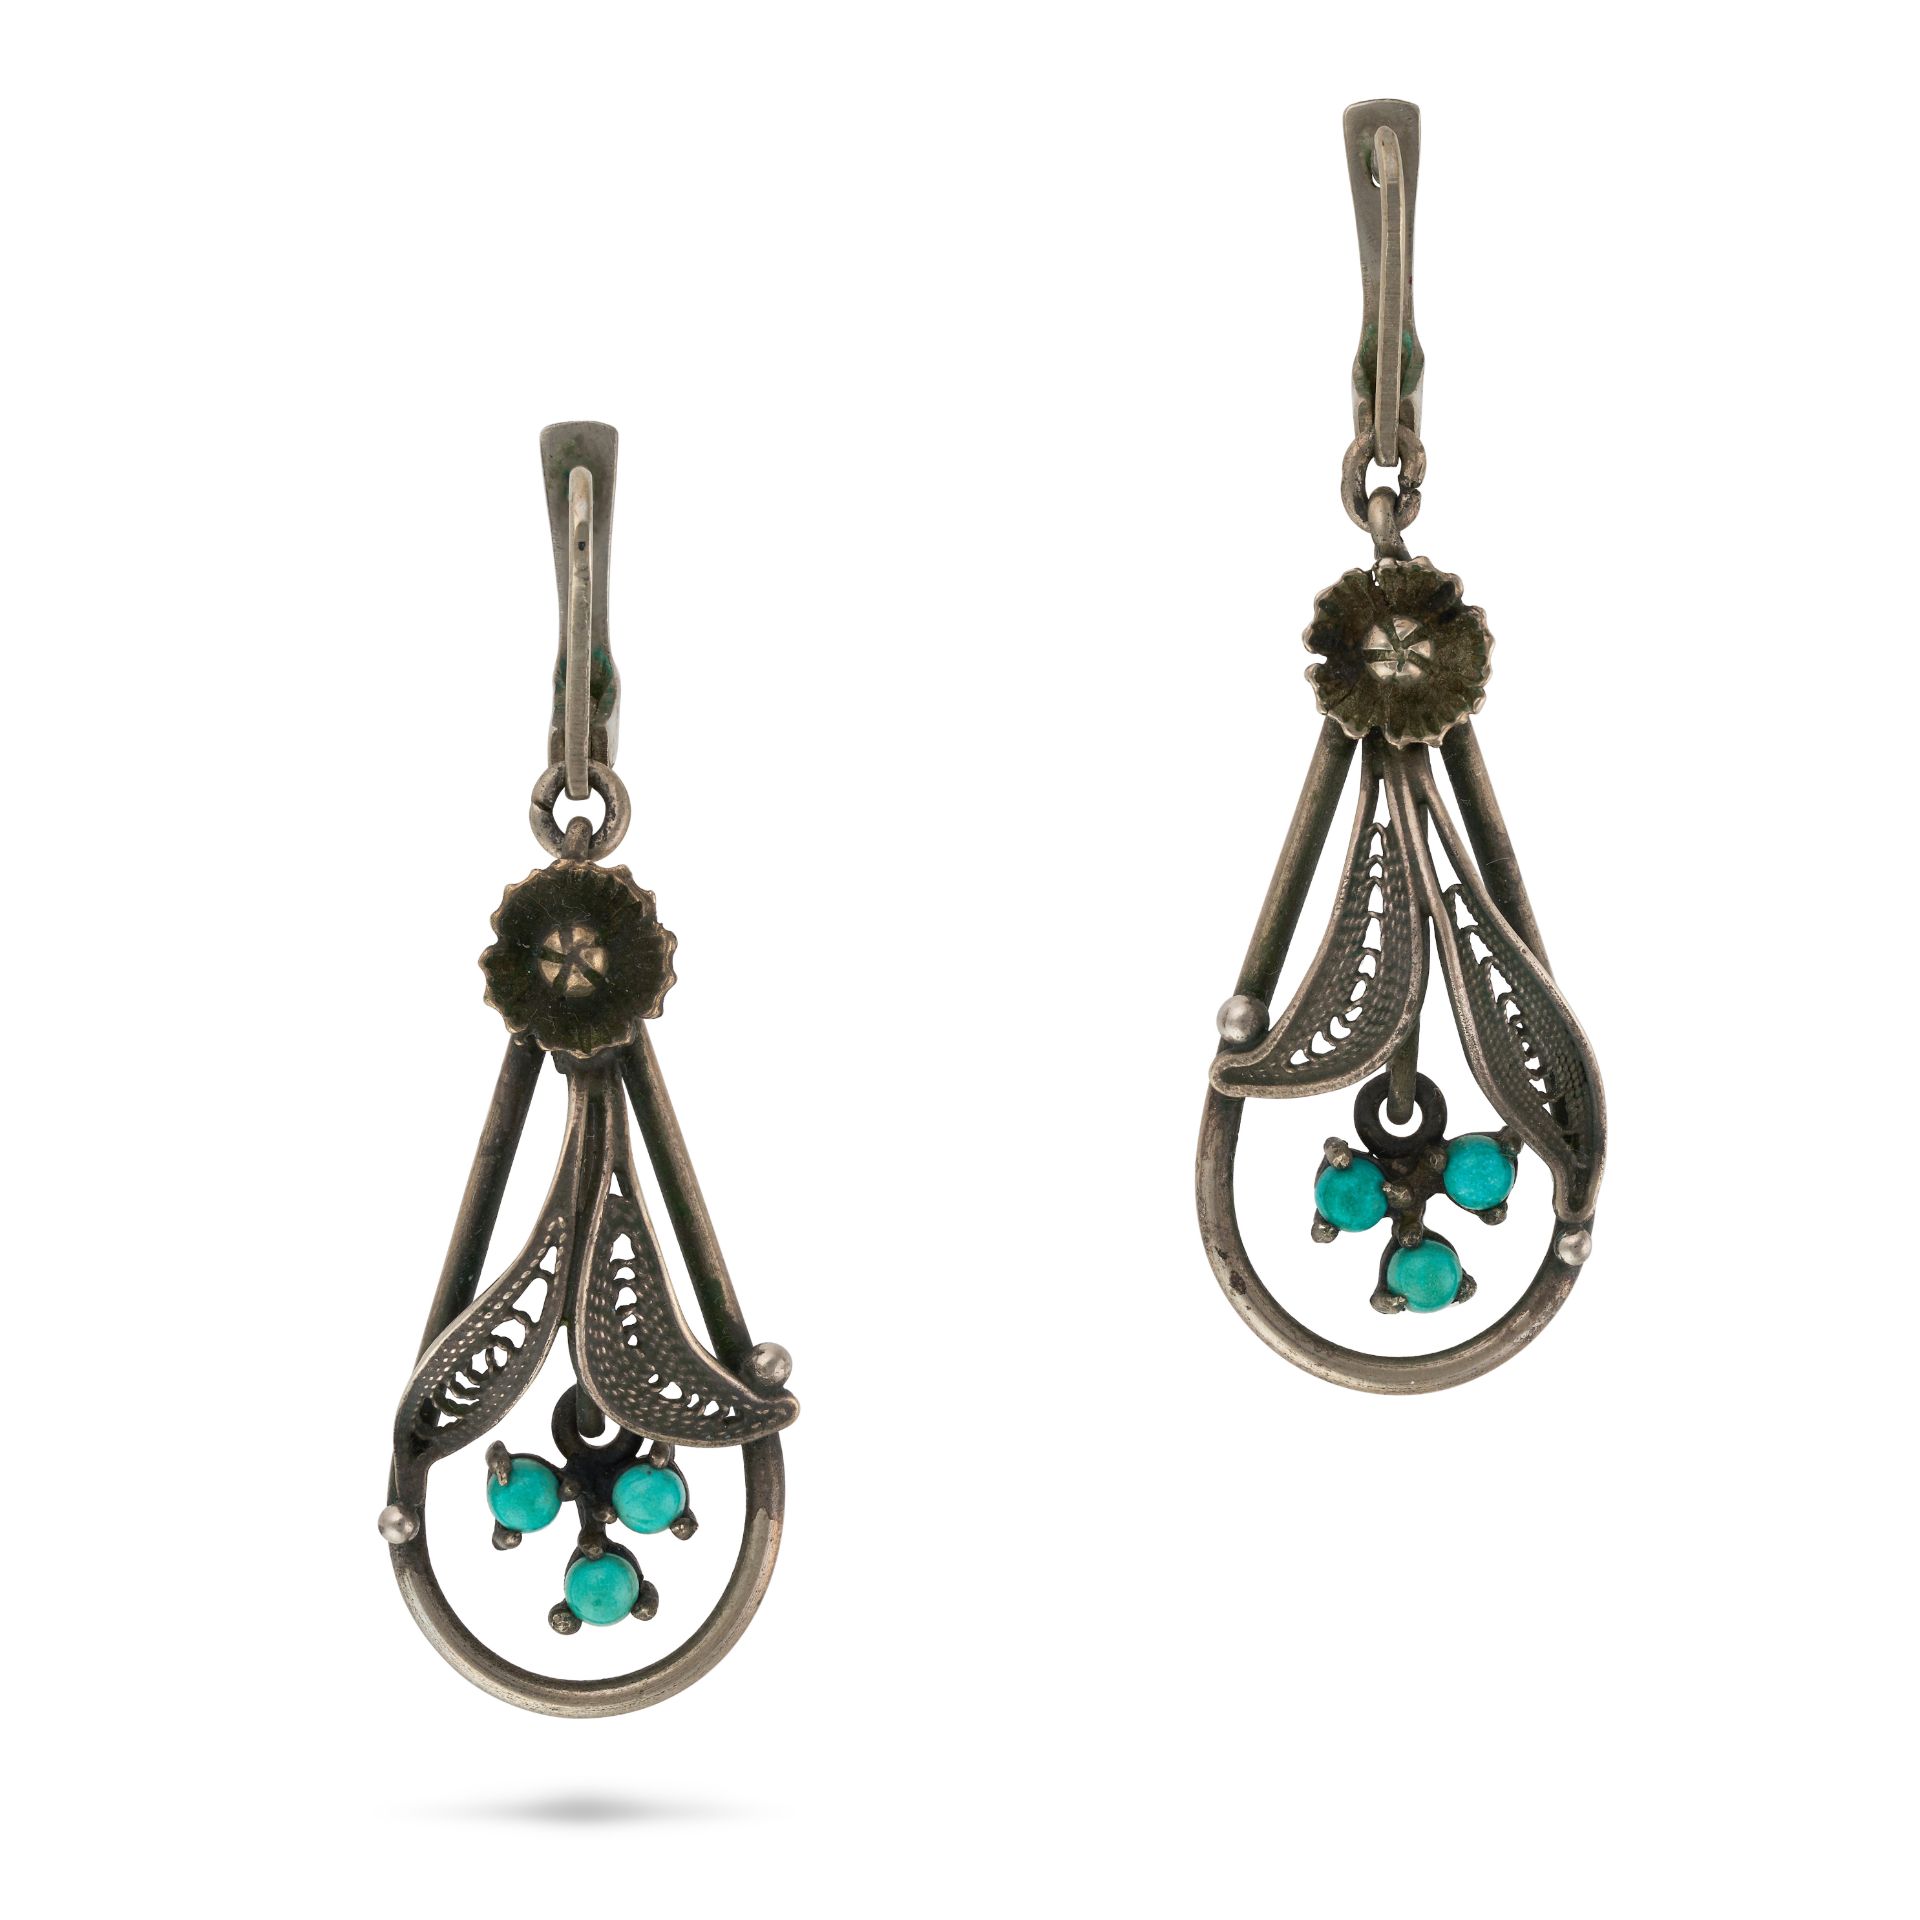 NO RESERVE - A PAIR OF ANTIQUE TURQUOISE DROP EARRINGS each suspending a filigree drop set with t...